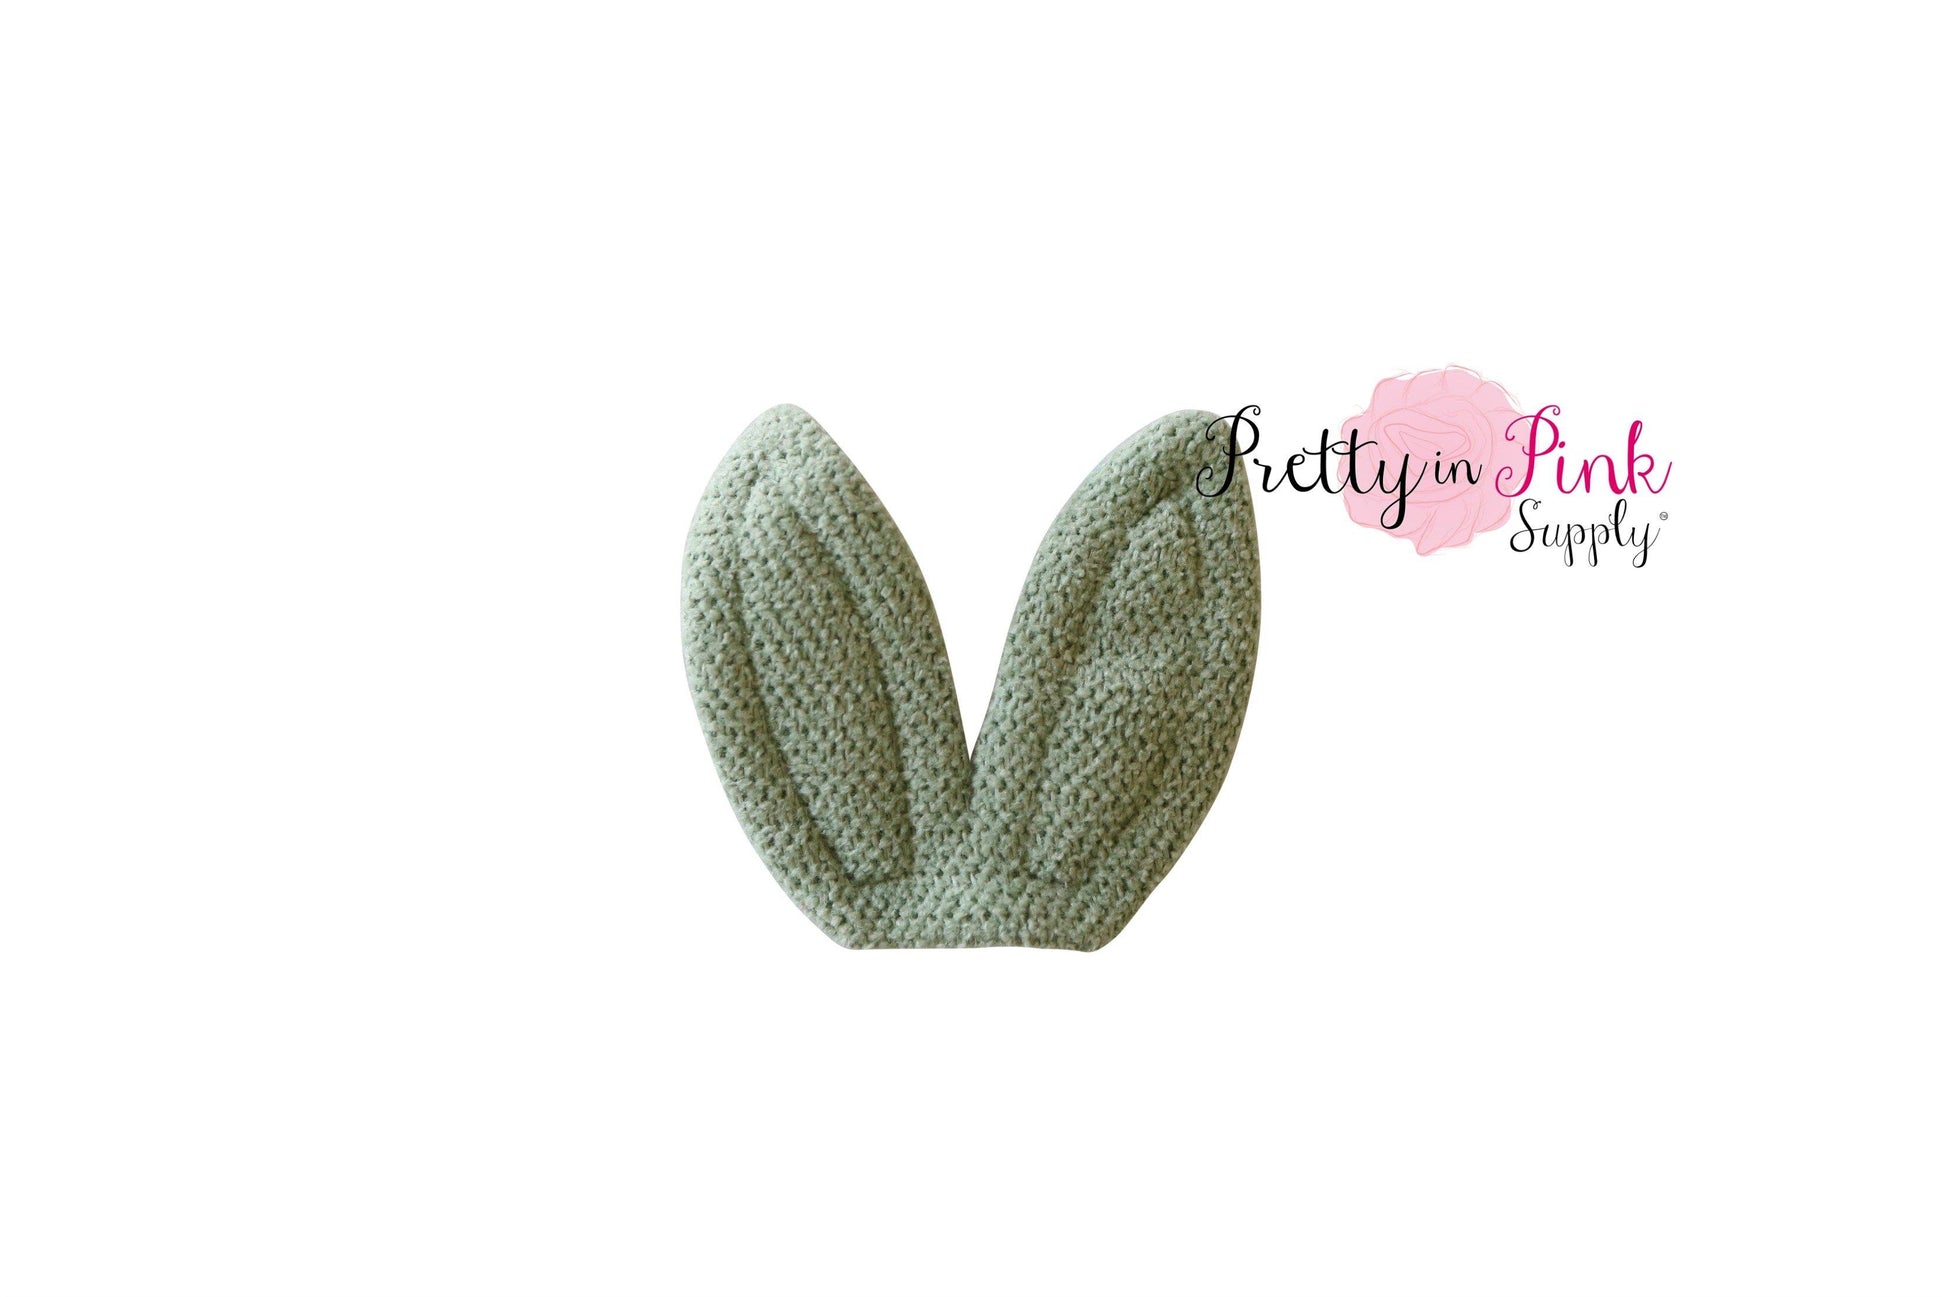 Soft Fabric Bunny Ears - Pretty in Pink Supply